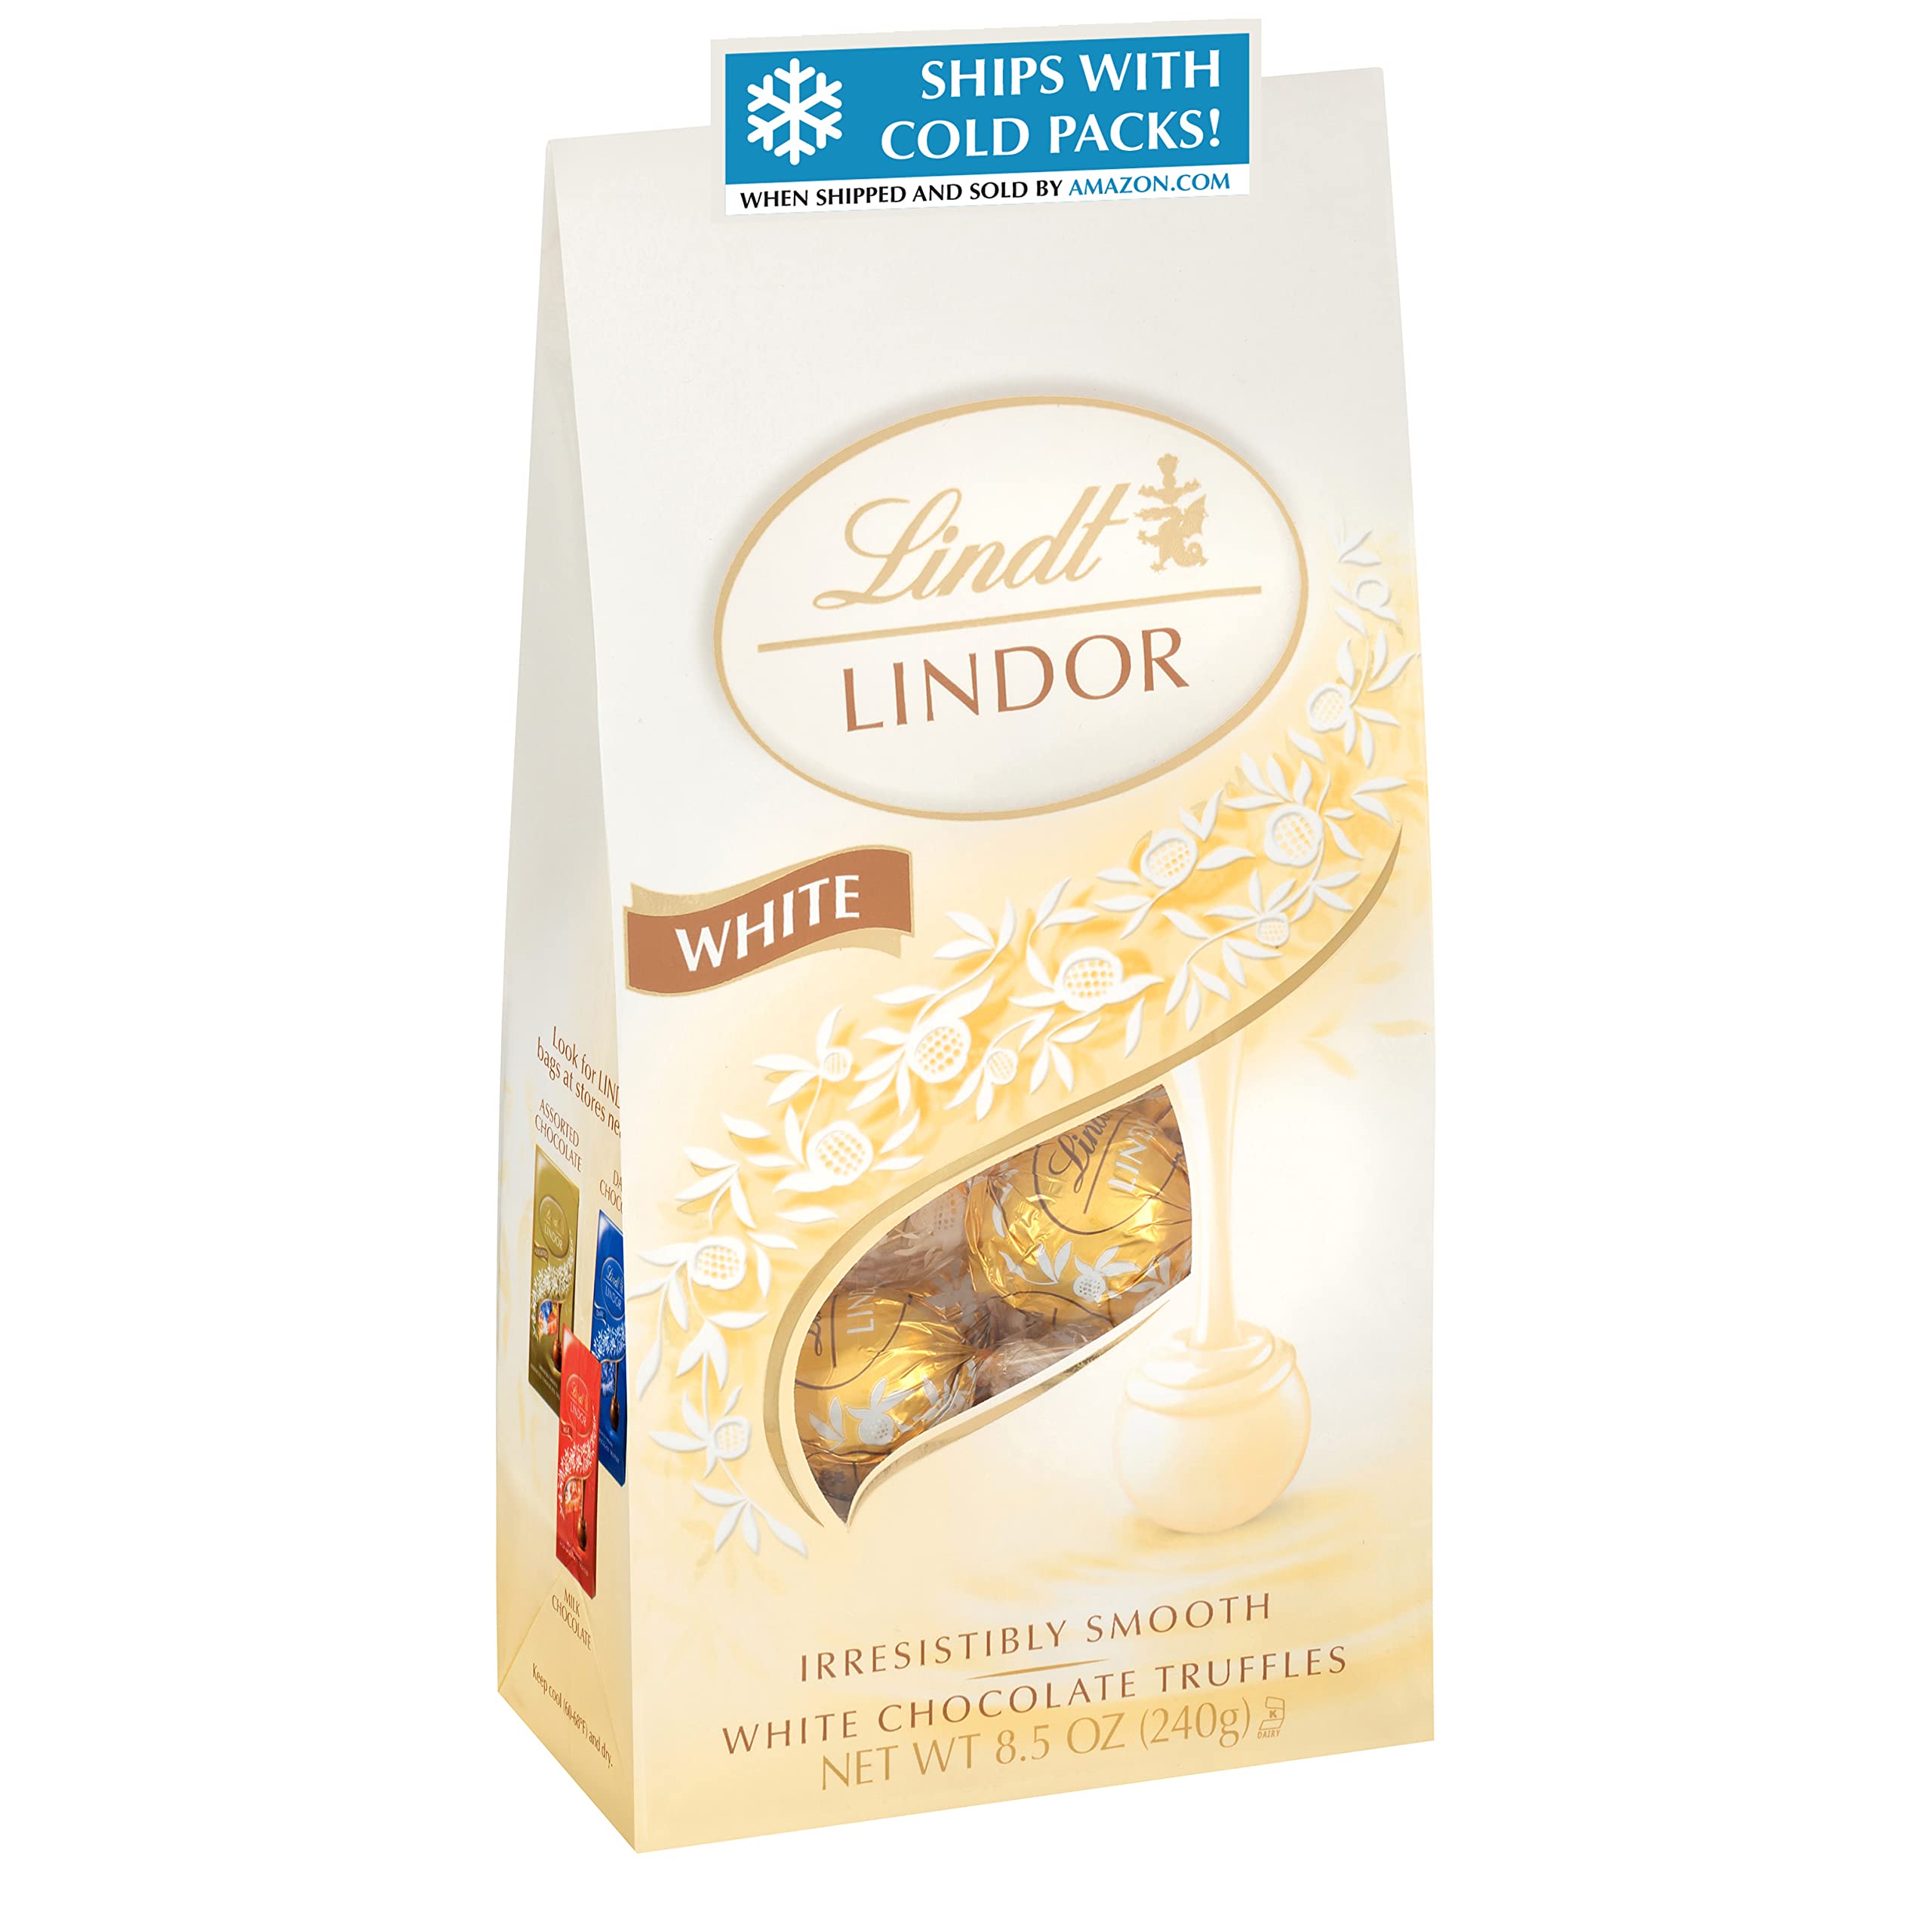 Lindt LINDOR White Chocolate Truffles, White Chocolate Candy with Smooth, Melting Truffle Center, Great for gift giving, 8.5 oz. Bag (6 Pack)